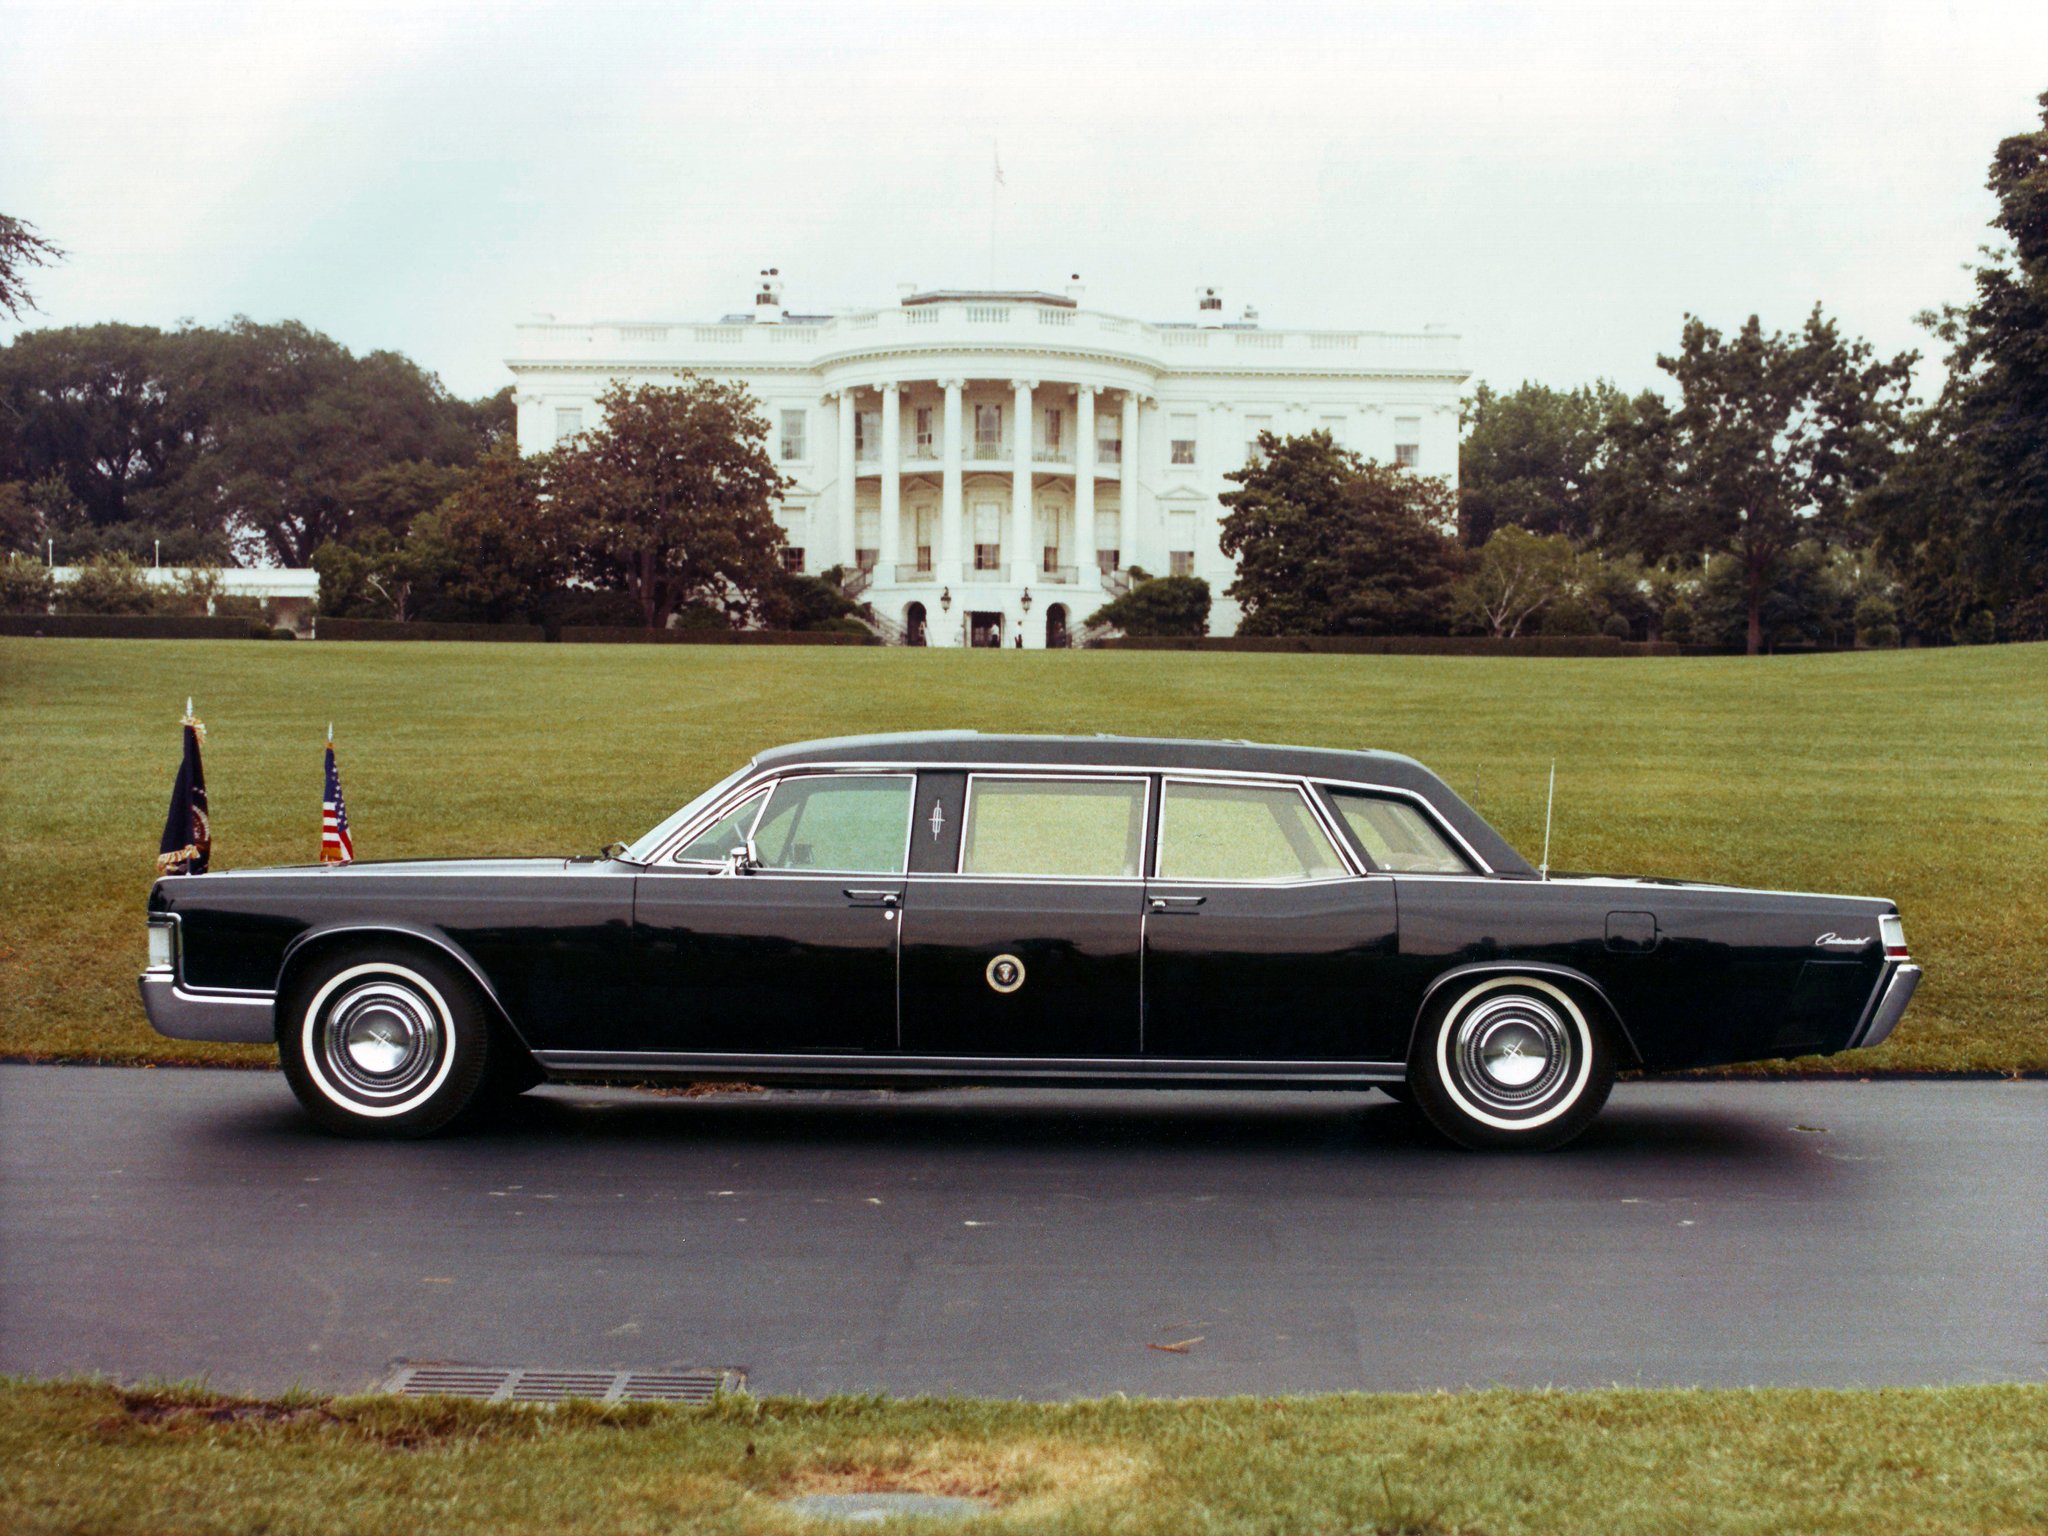 1969, Lincoln, Continental, Presidential, Limousine, Luxury, Armored Wallpaper